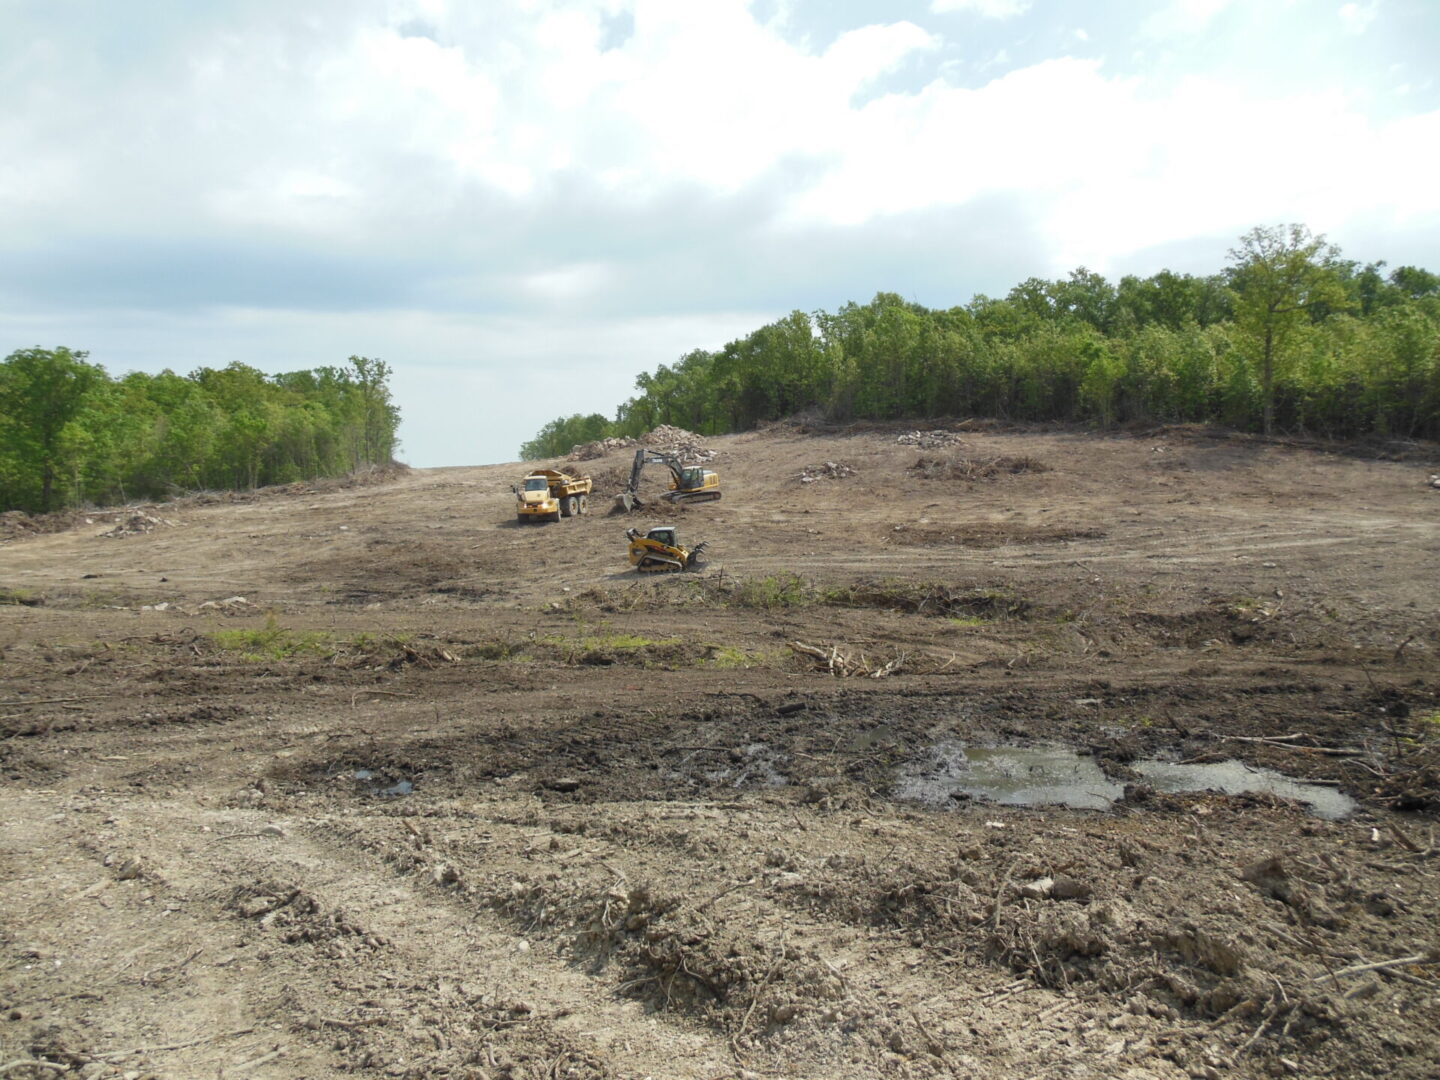 Land clearing in progress with heavy machinery on a partly deforested terrain.